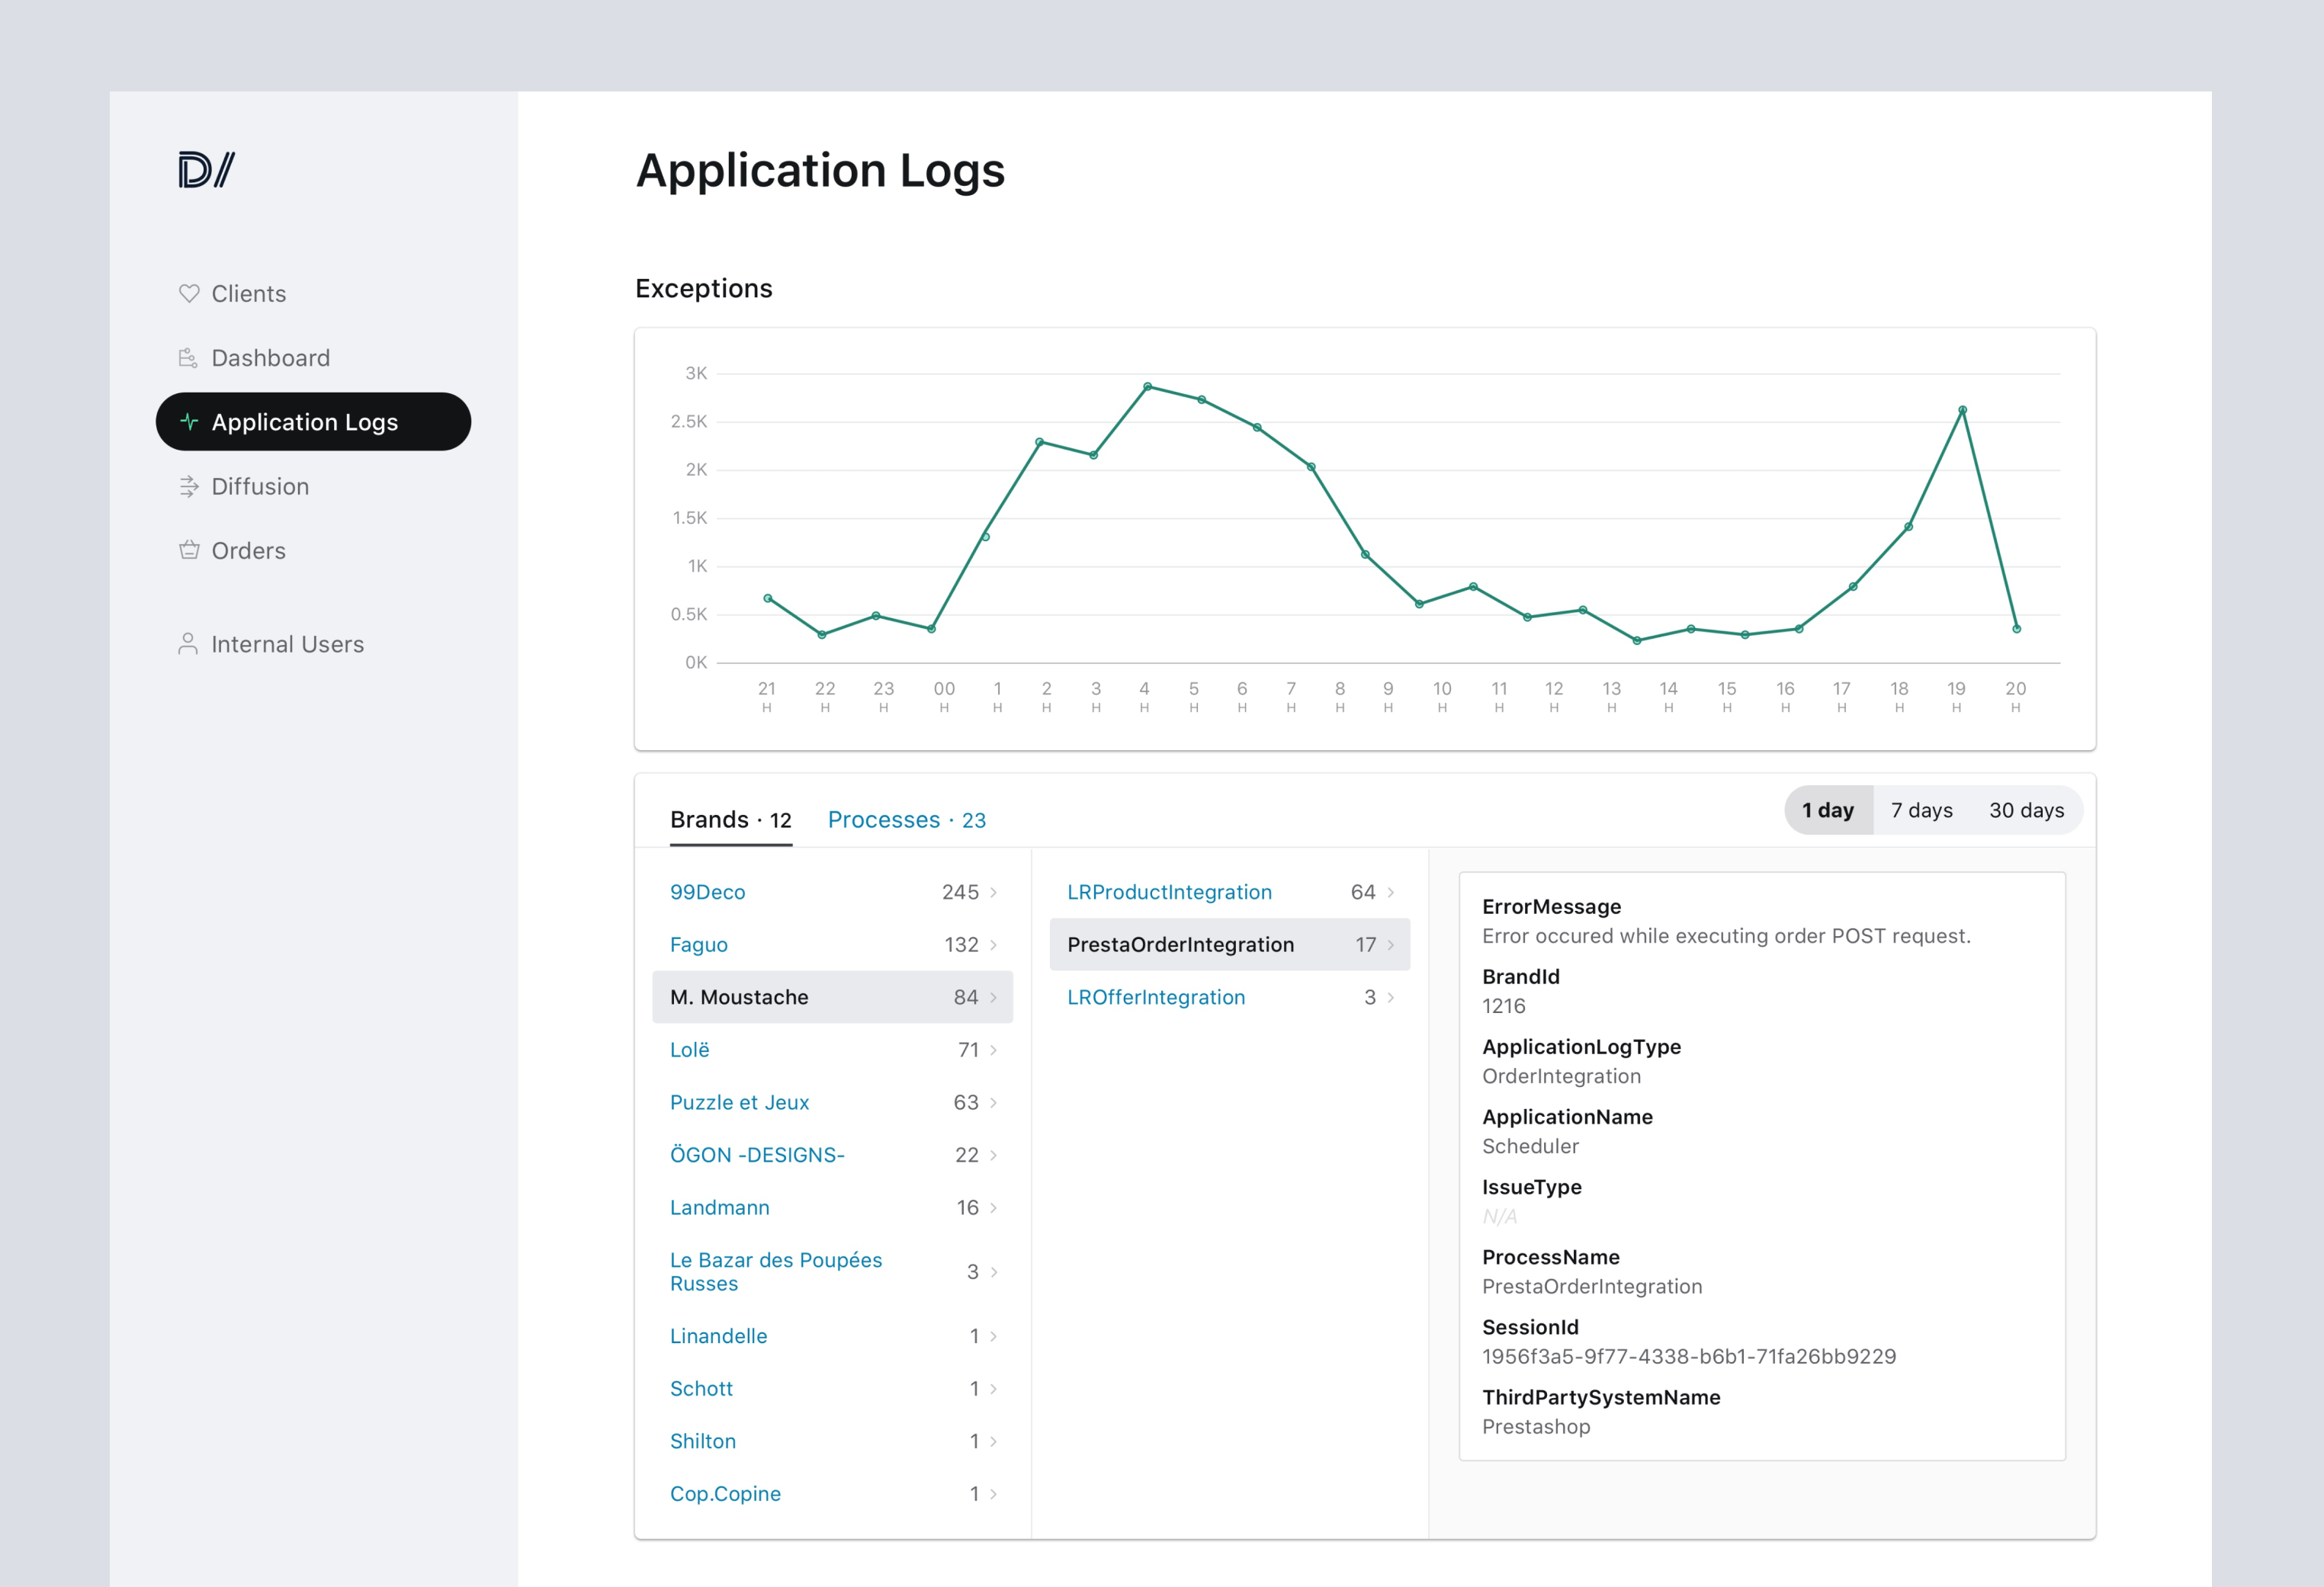 View of application logs, showing errors and details